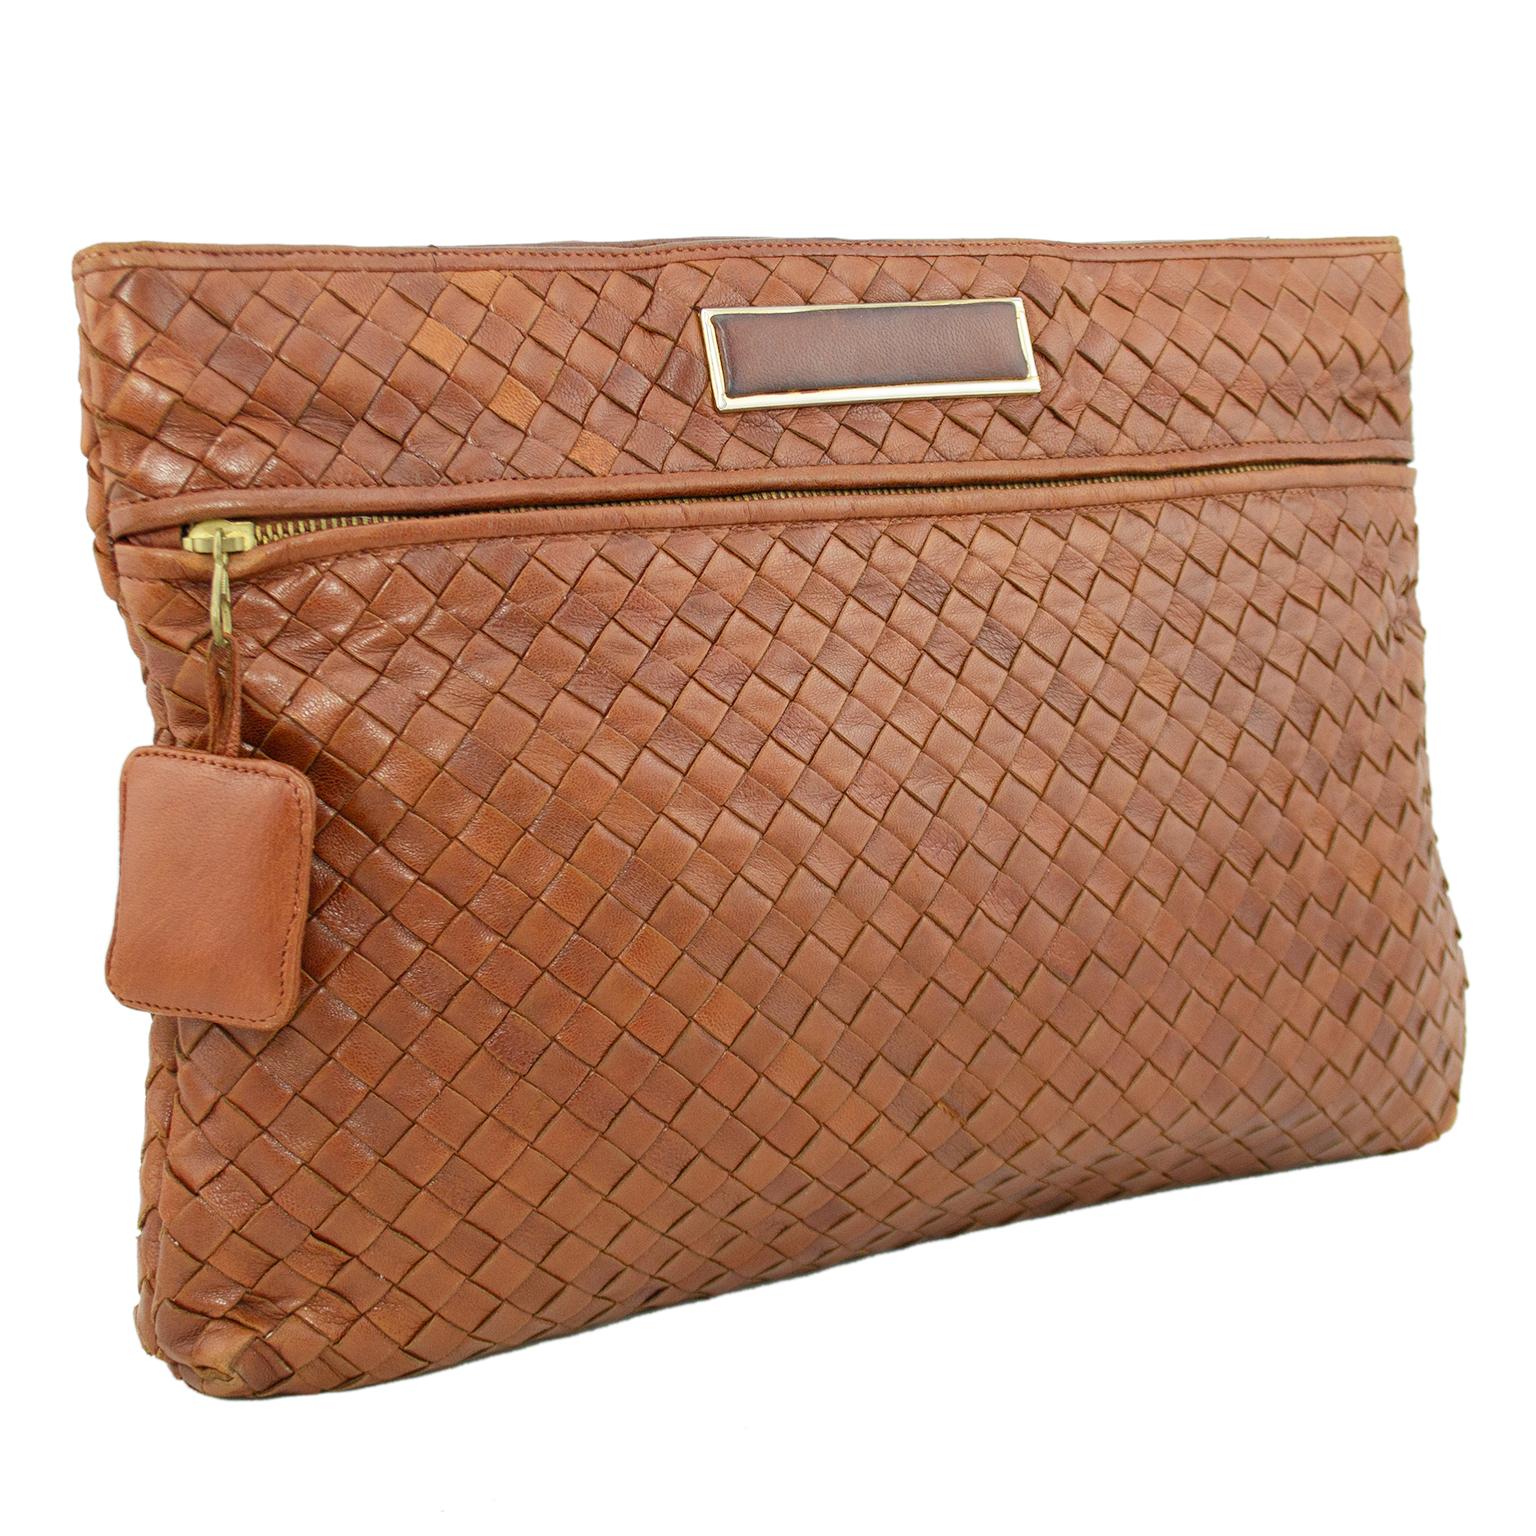 Bottega Veneta large soft clutch from the 1980s. This clutch is created from the iconic Bottega Intrecciato weaved leather in a supple saddle brown. Top fastens with a large snap button and opens to a large single compartment lined in dark brown